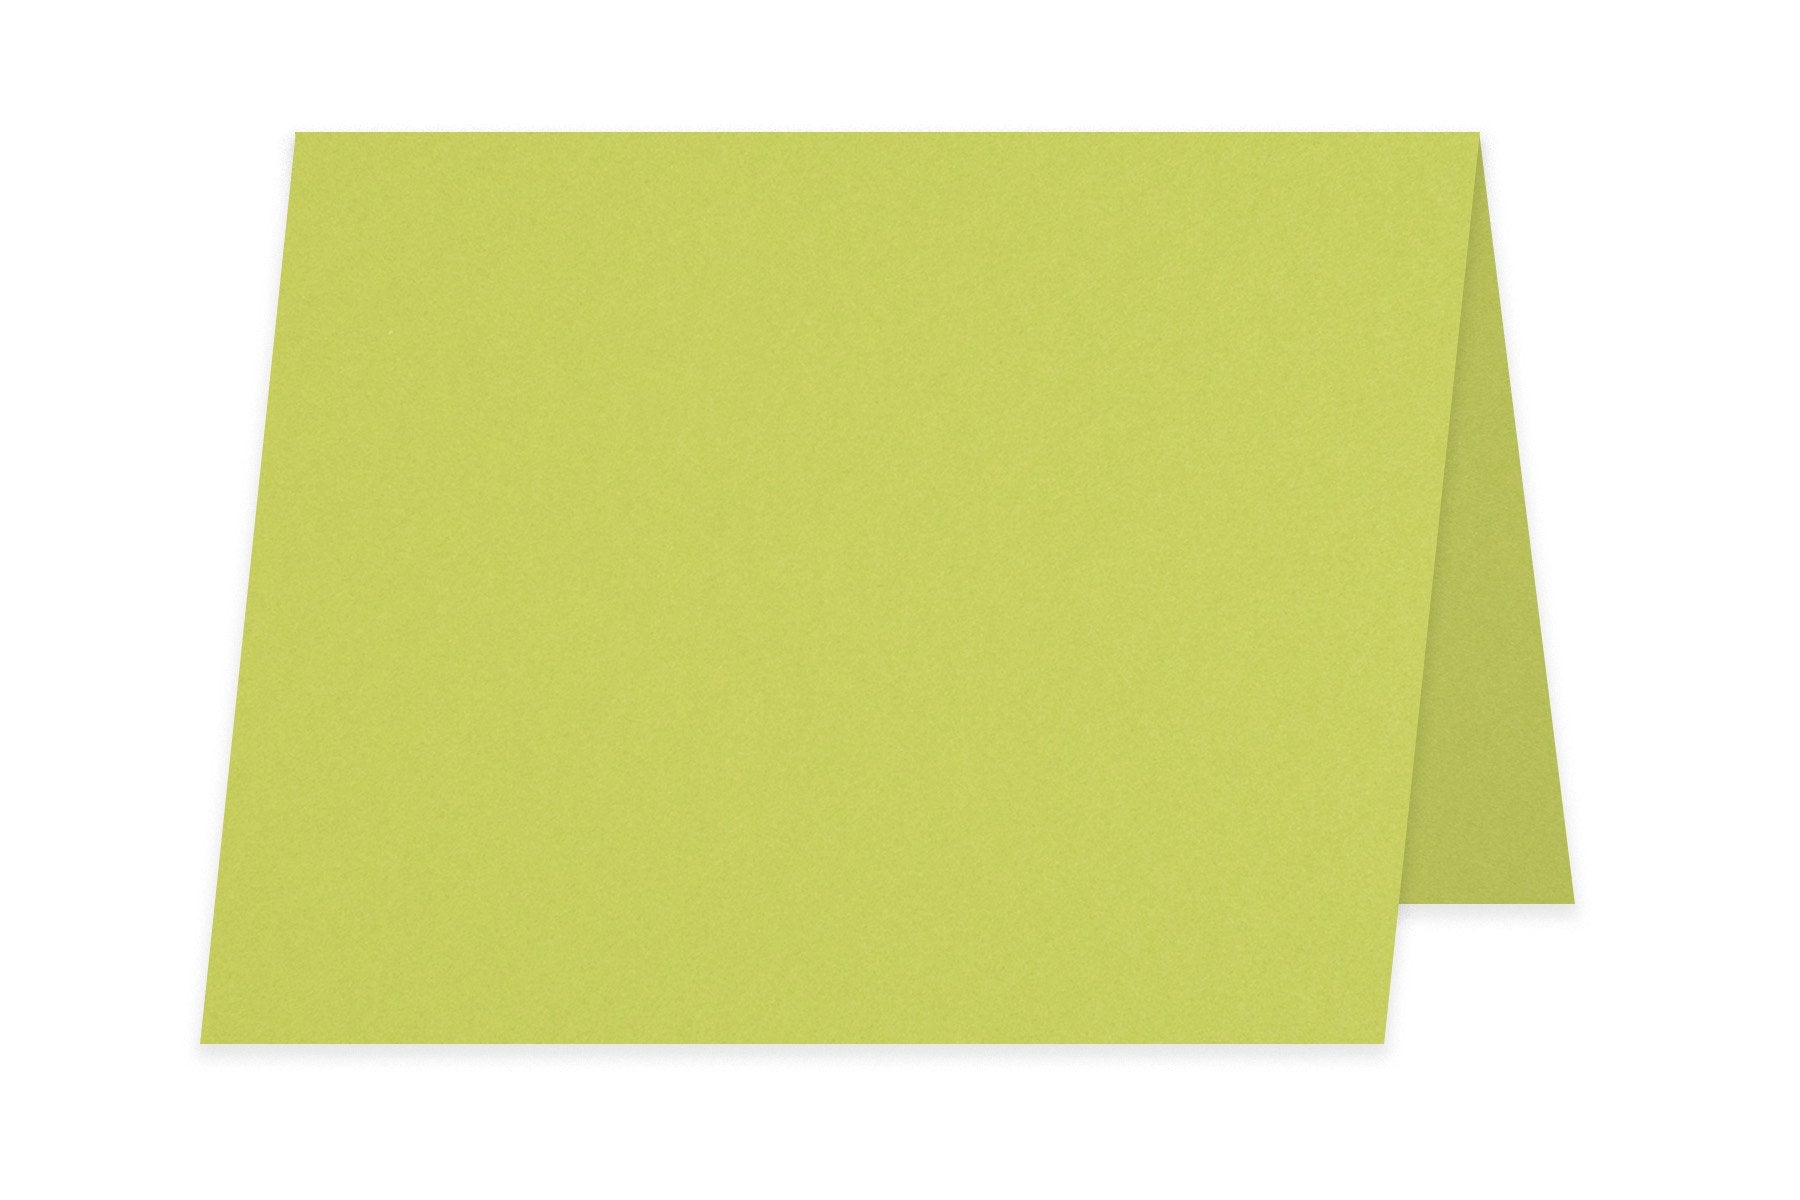 Bright Yellow Card Stock for menus, flyers, DIY Cards and posters -  CutCardStock